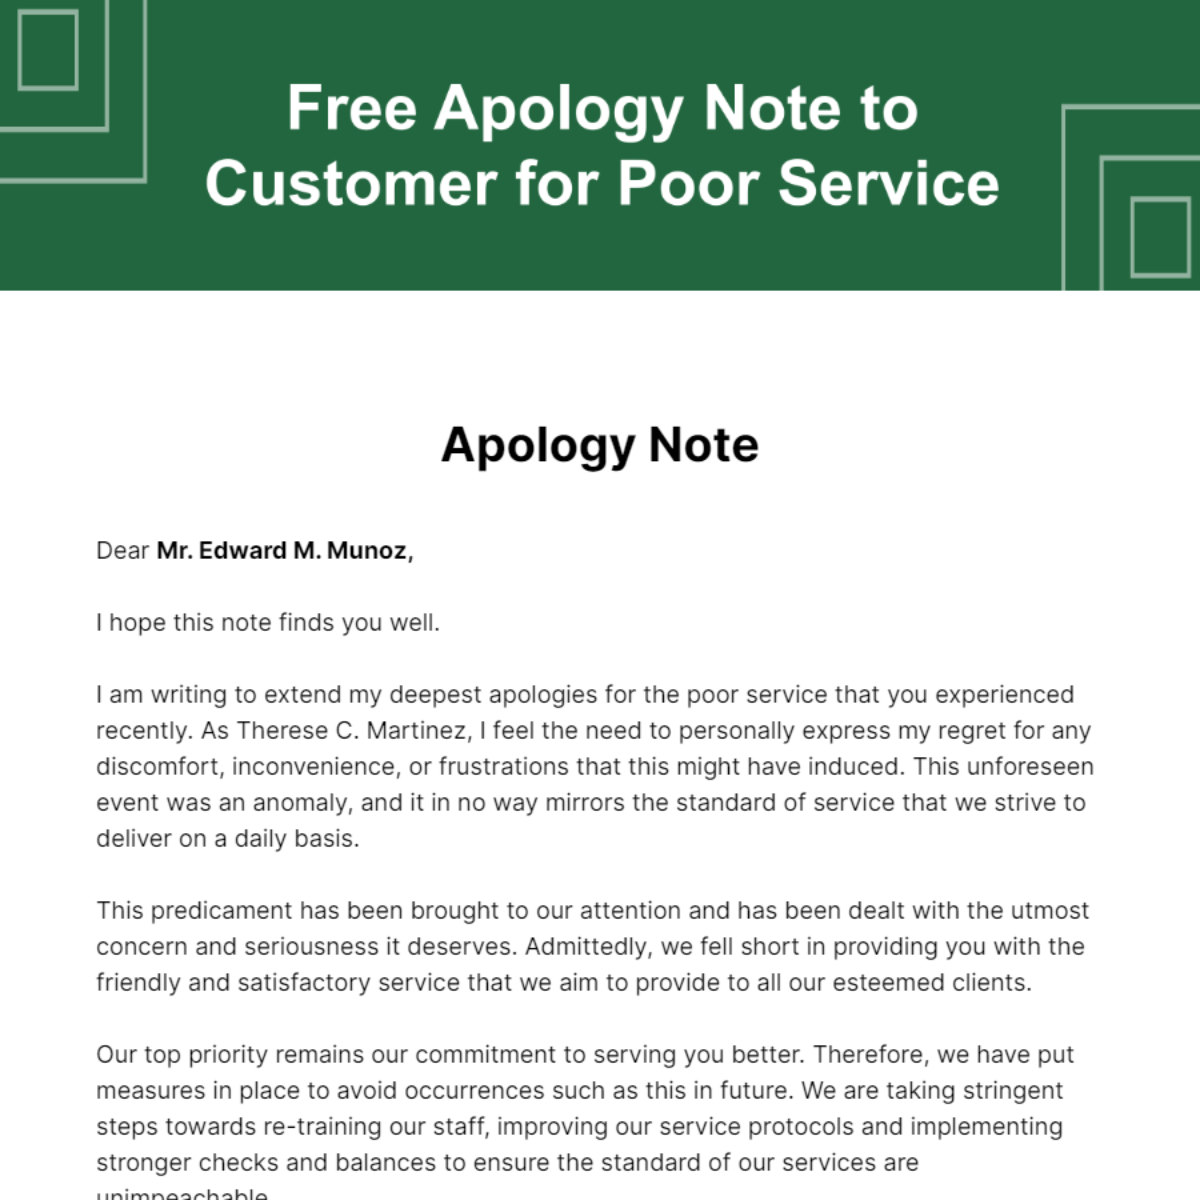 Free Apology Note to Customer for Poor Service Template